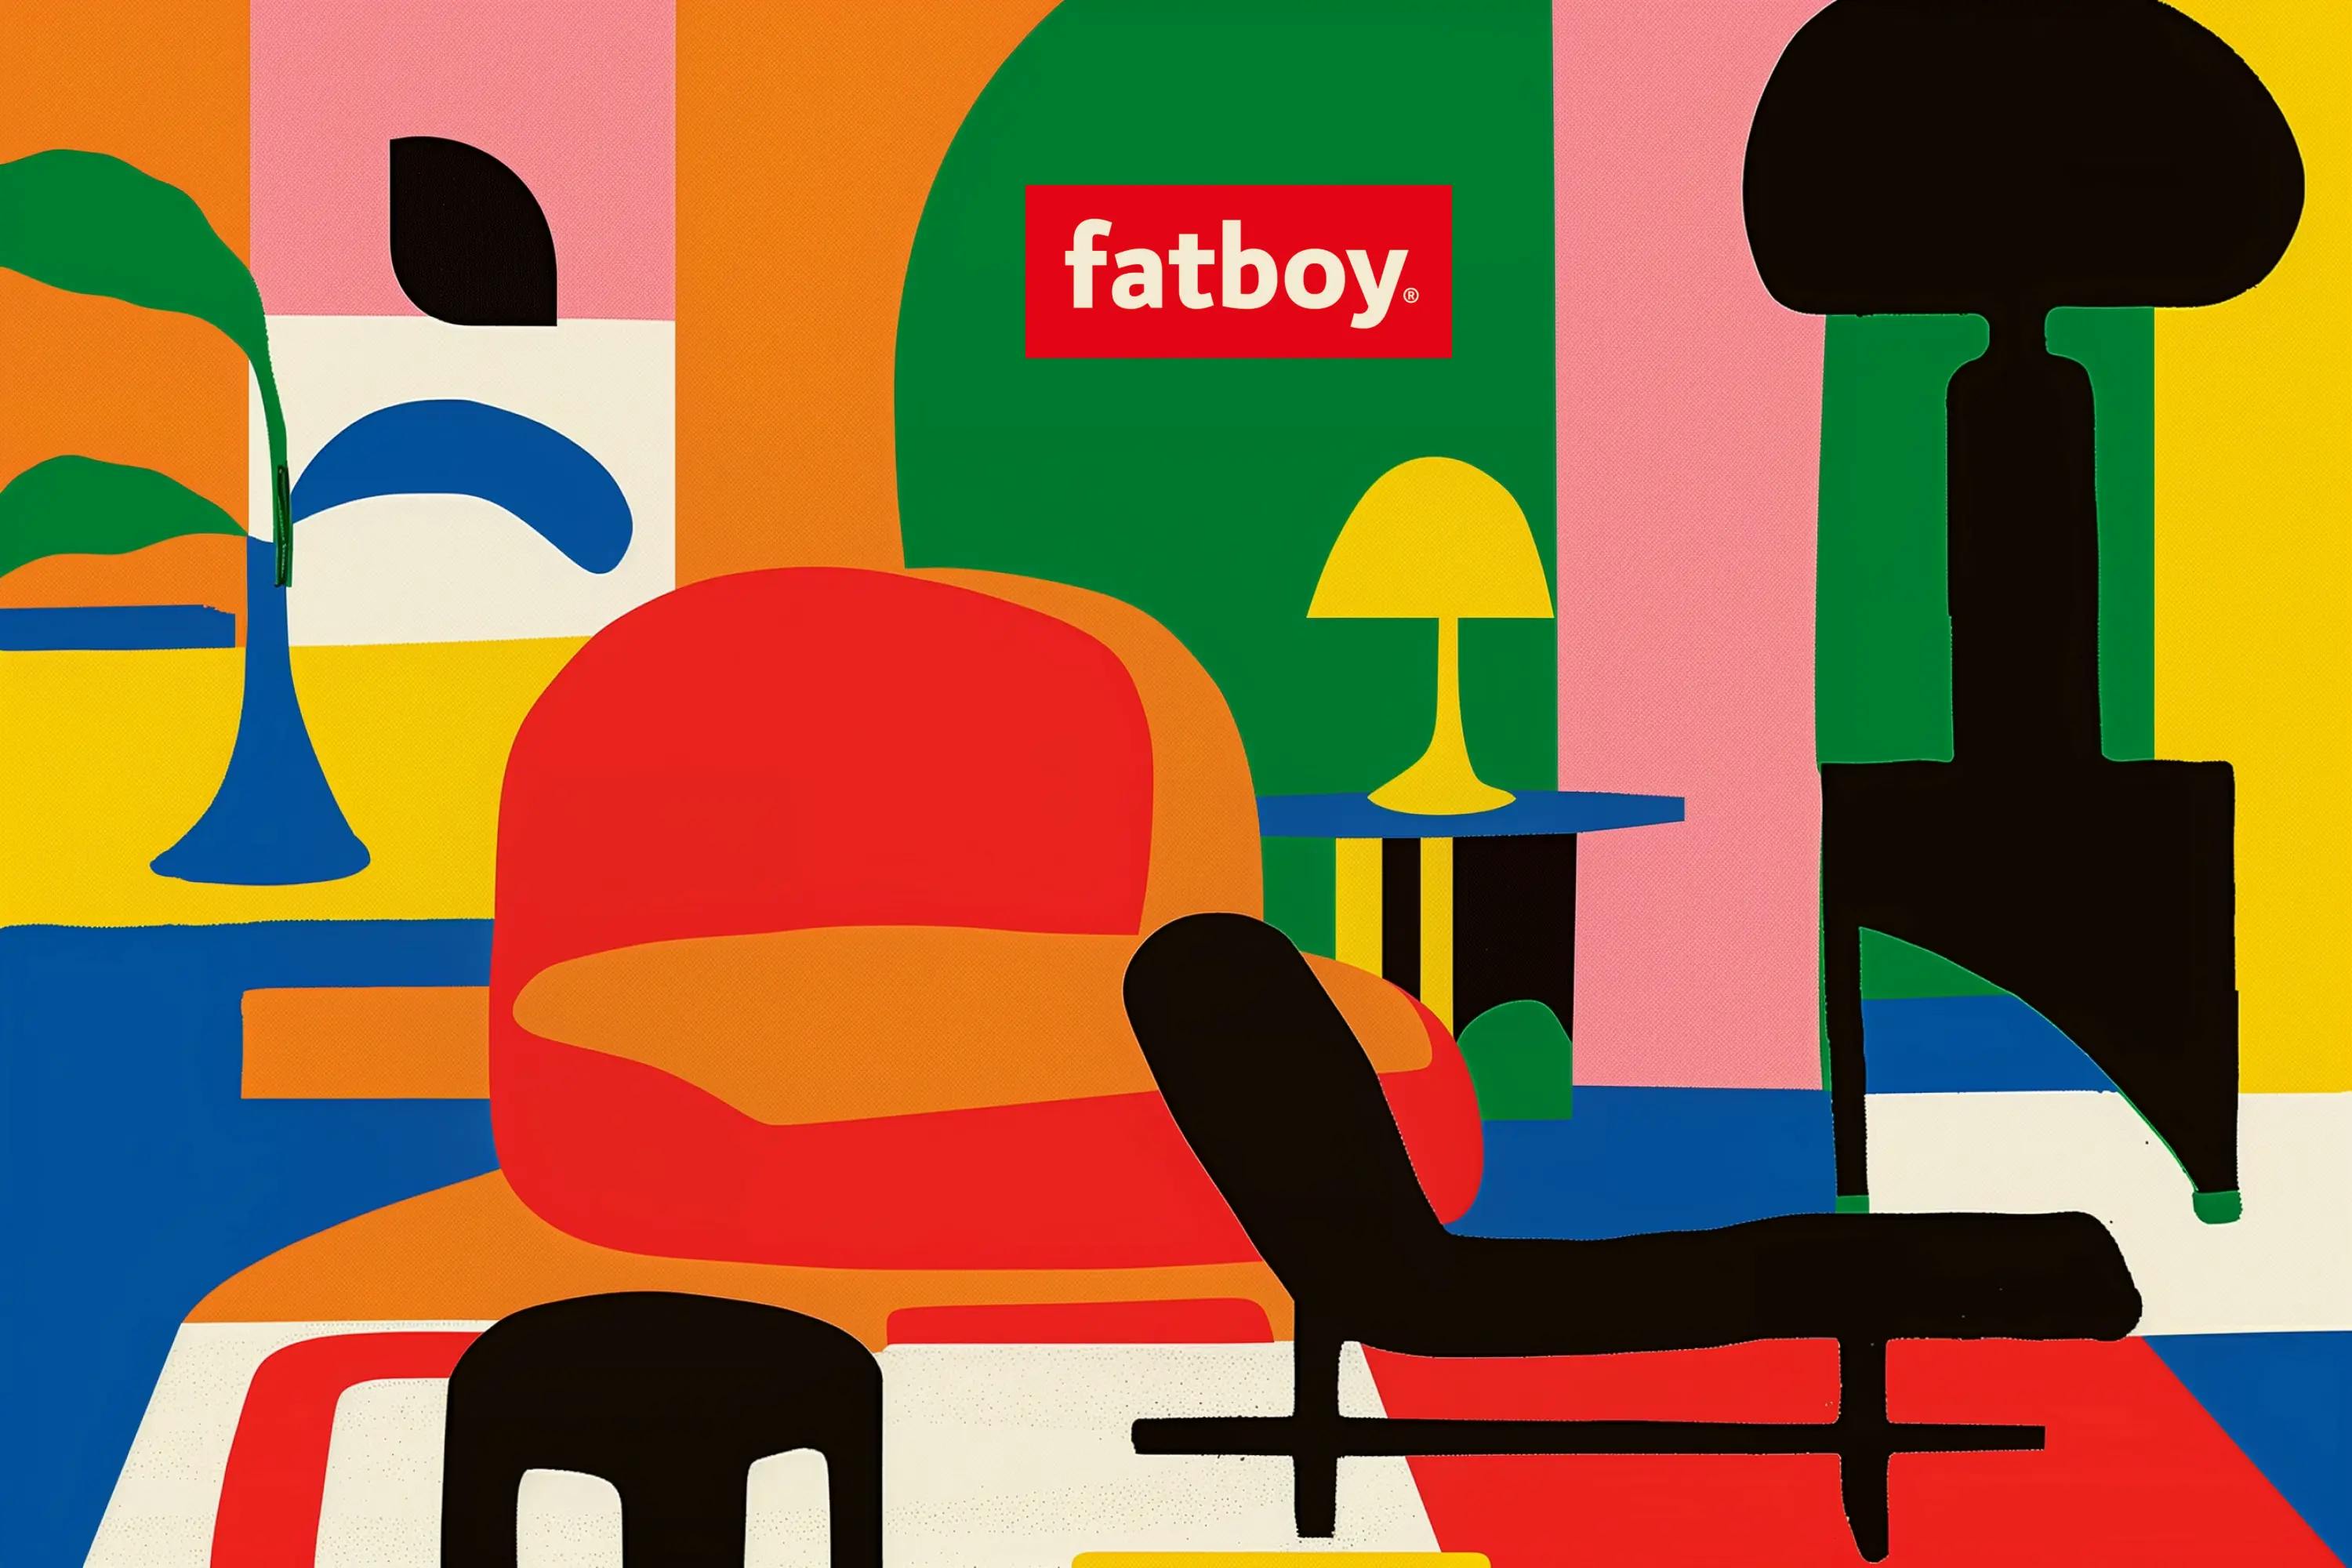 Digital art of a living room featuring fatboy furniture with a fatboy logo